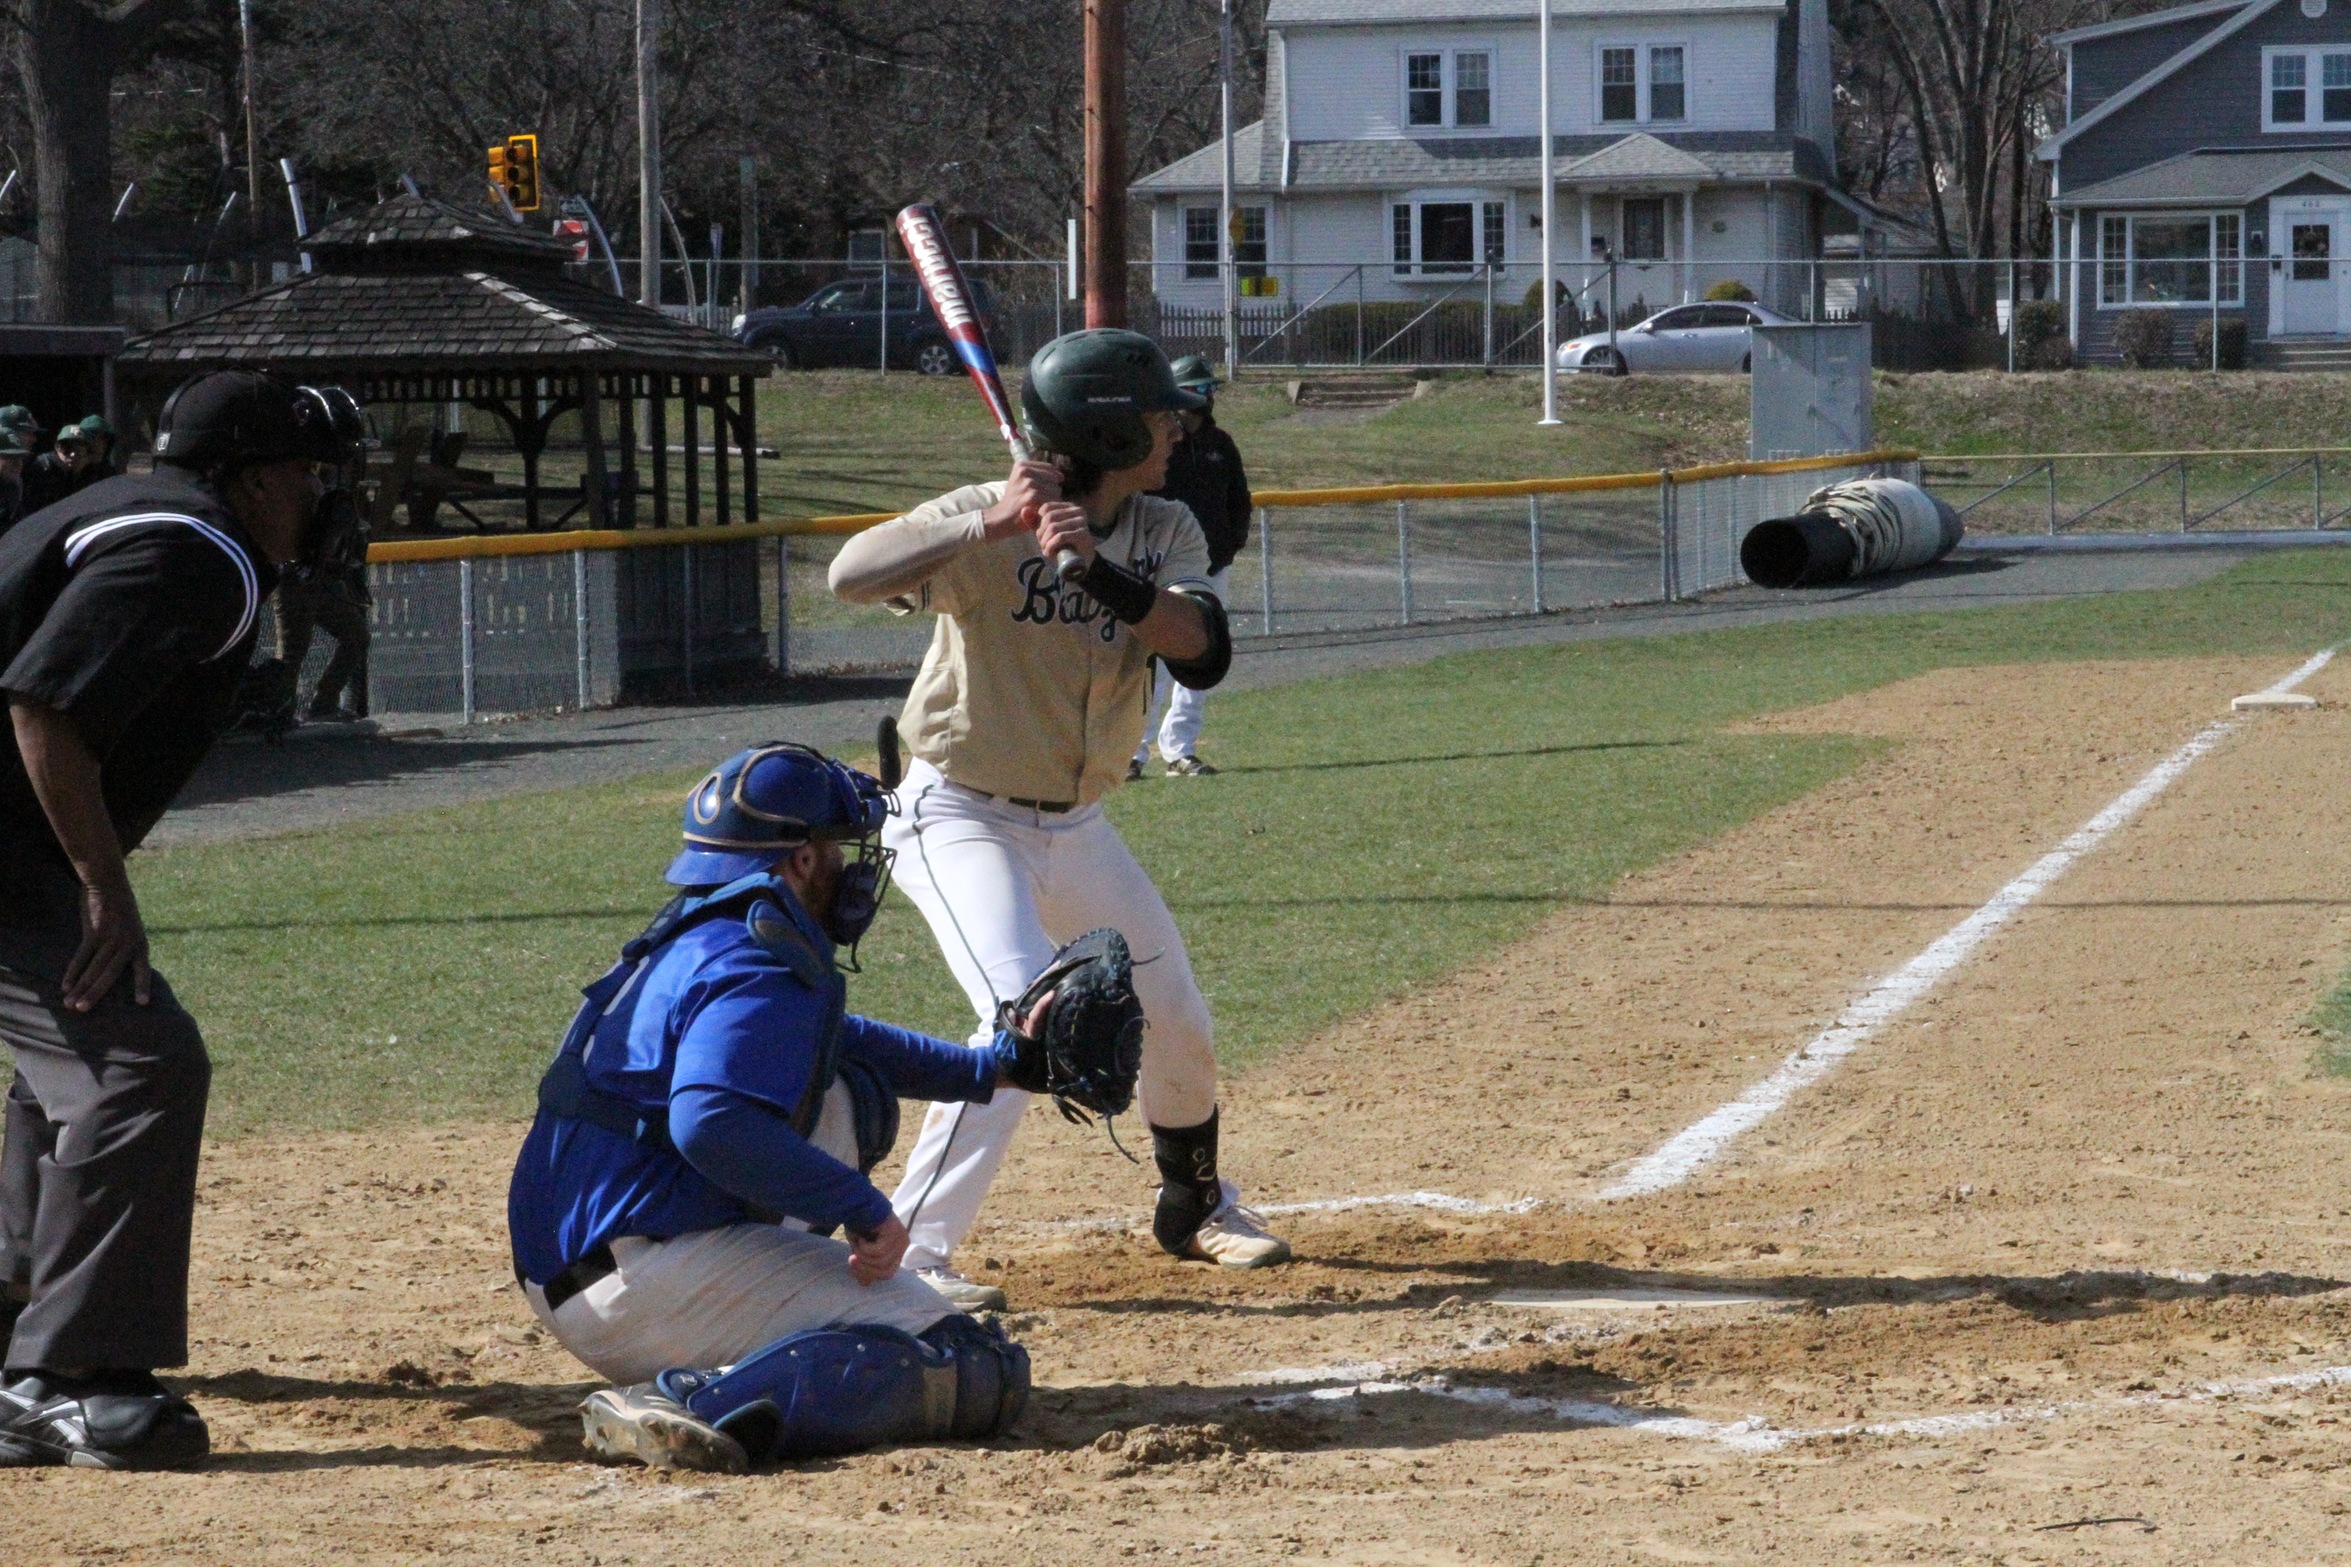 4-Hit Day for Cook As Elms College Skirts Past Thomas (ME) College Terriers